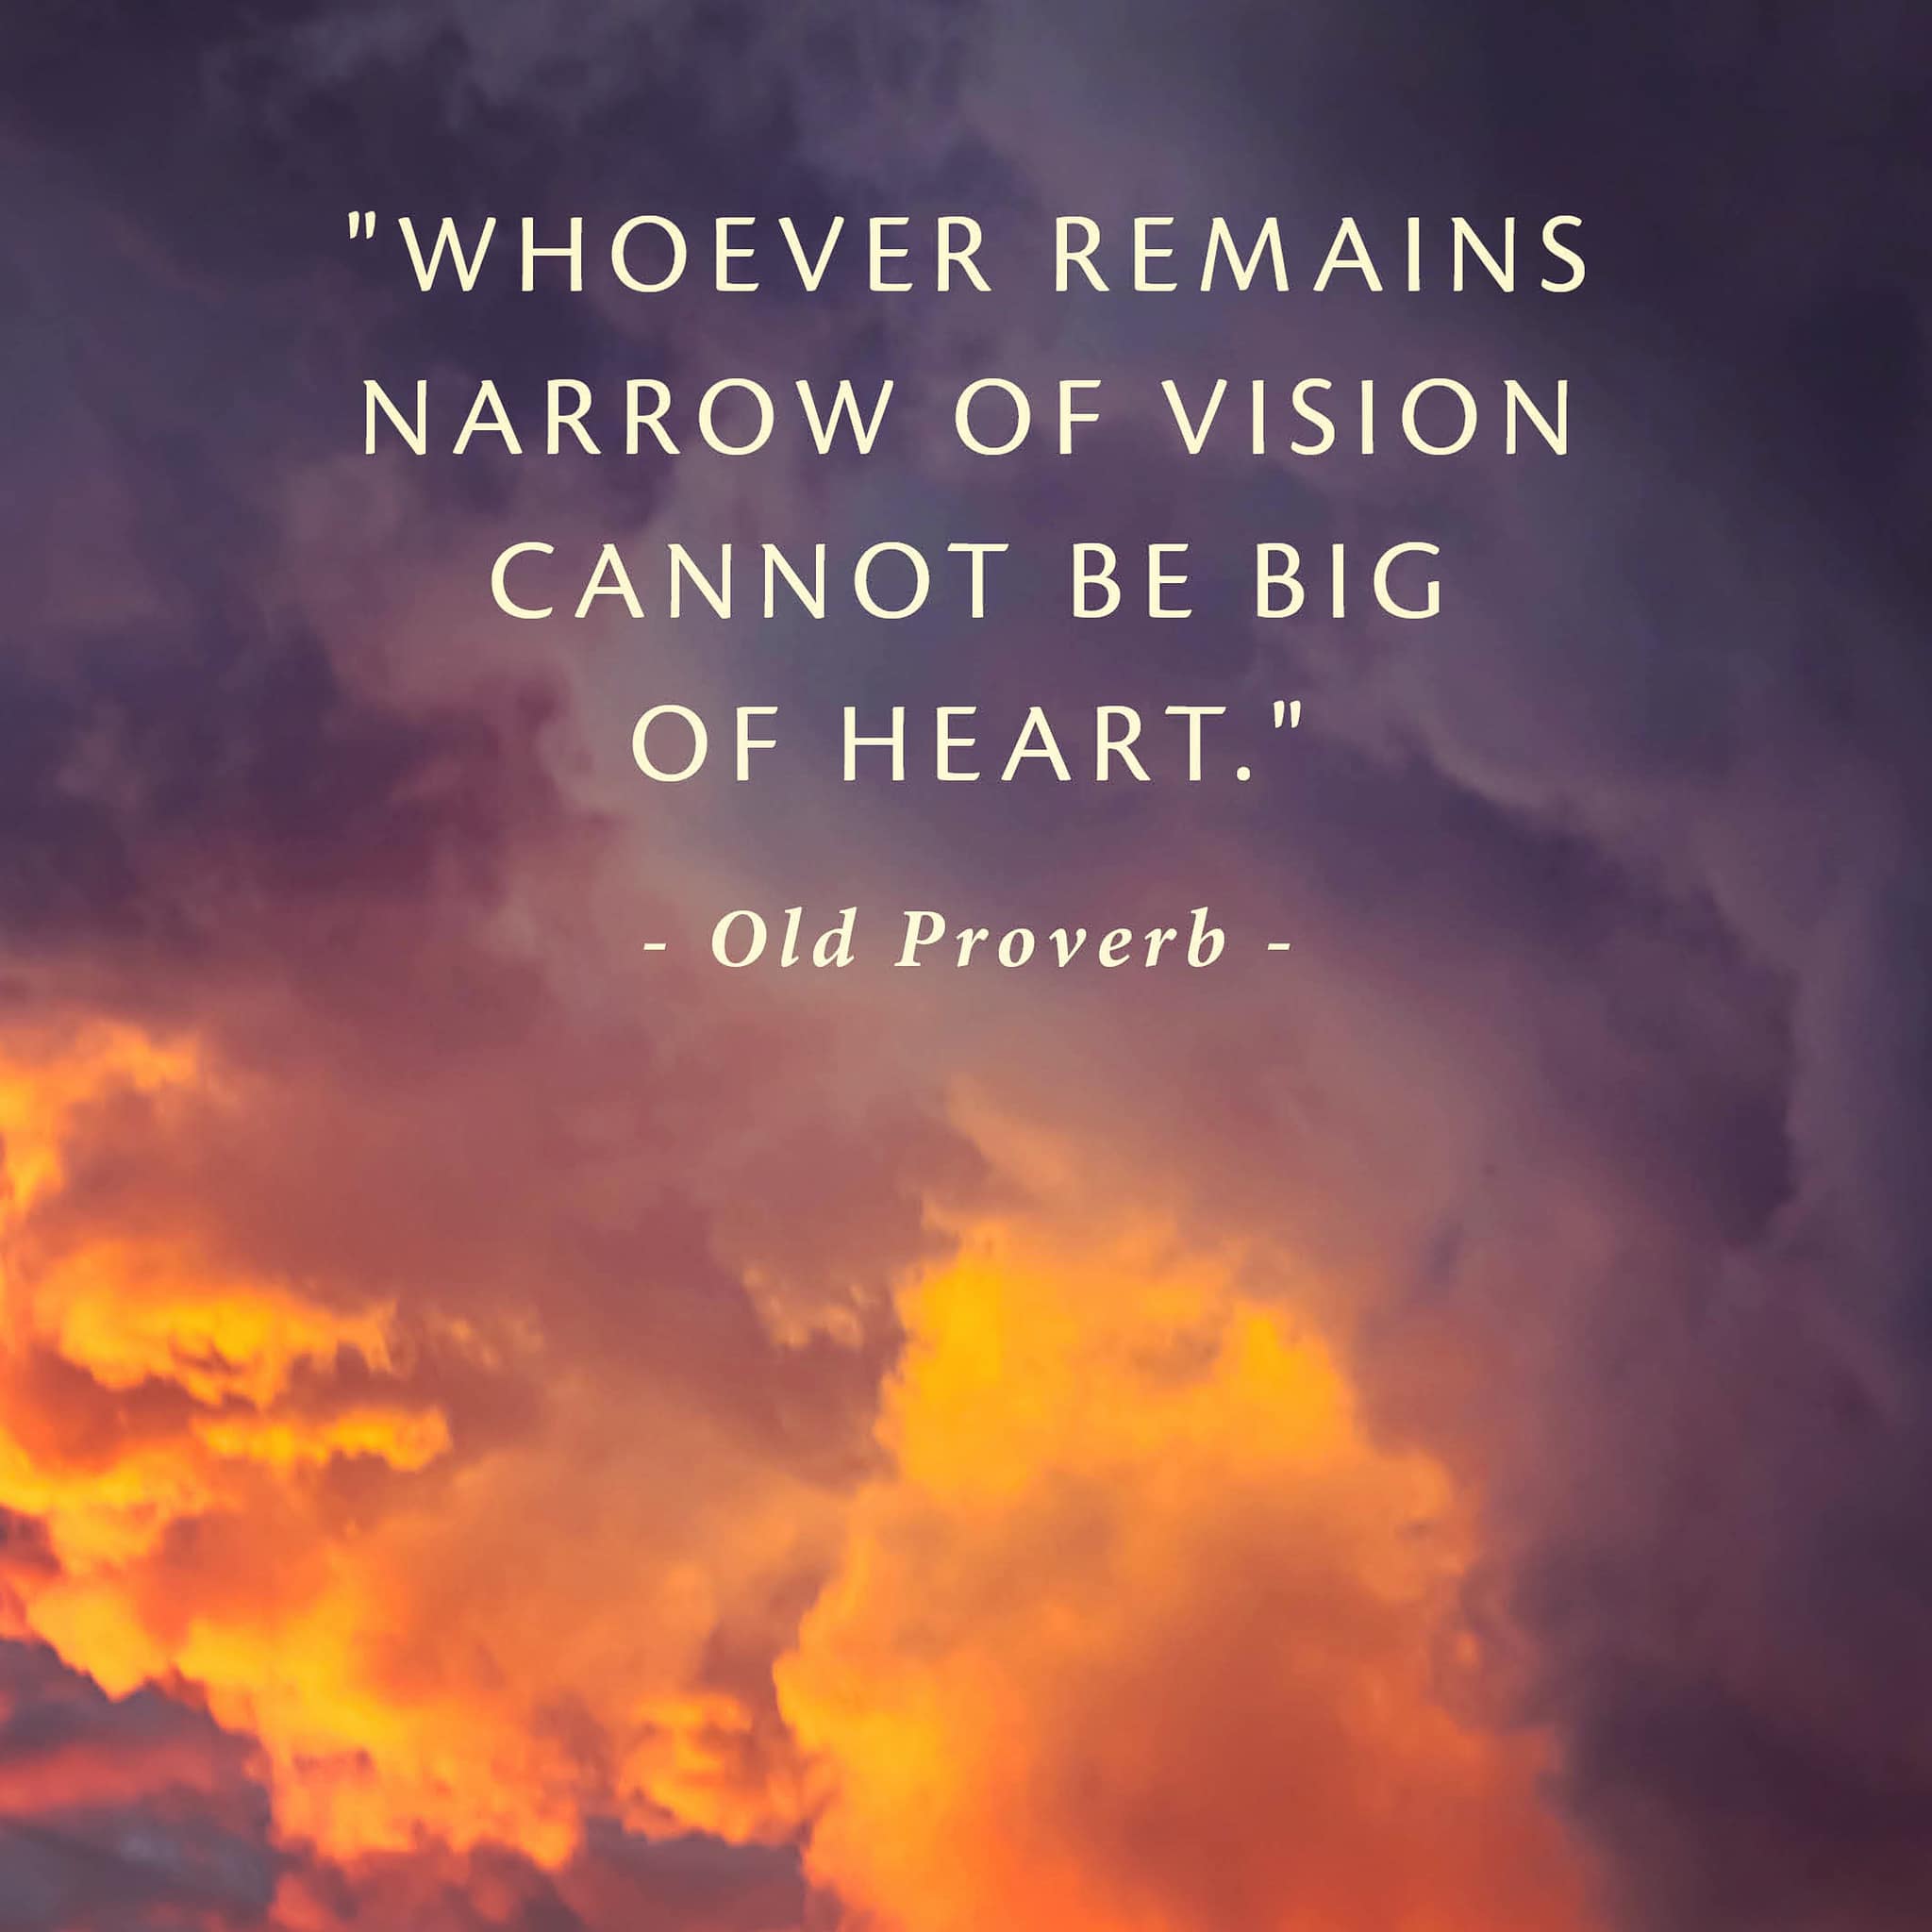 He who is narrow of vision cannot be big of heart. Chinese Proverb